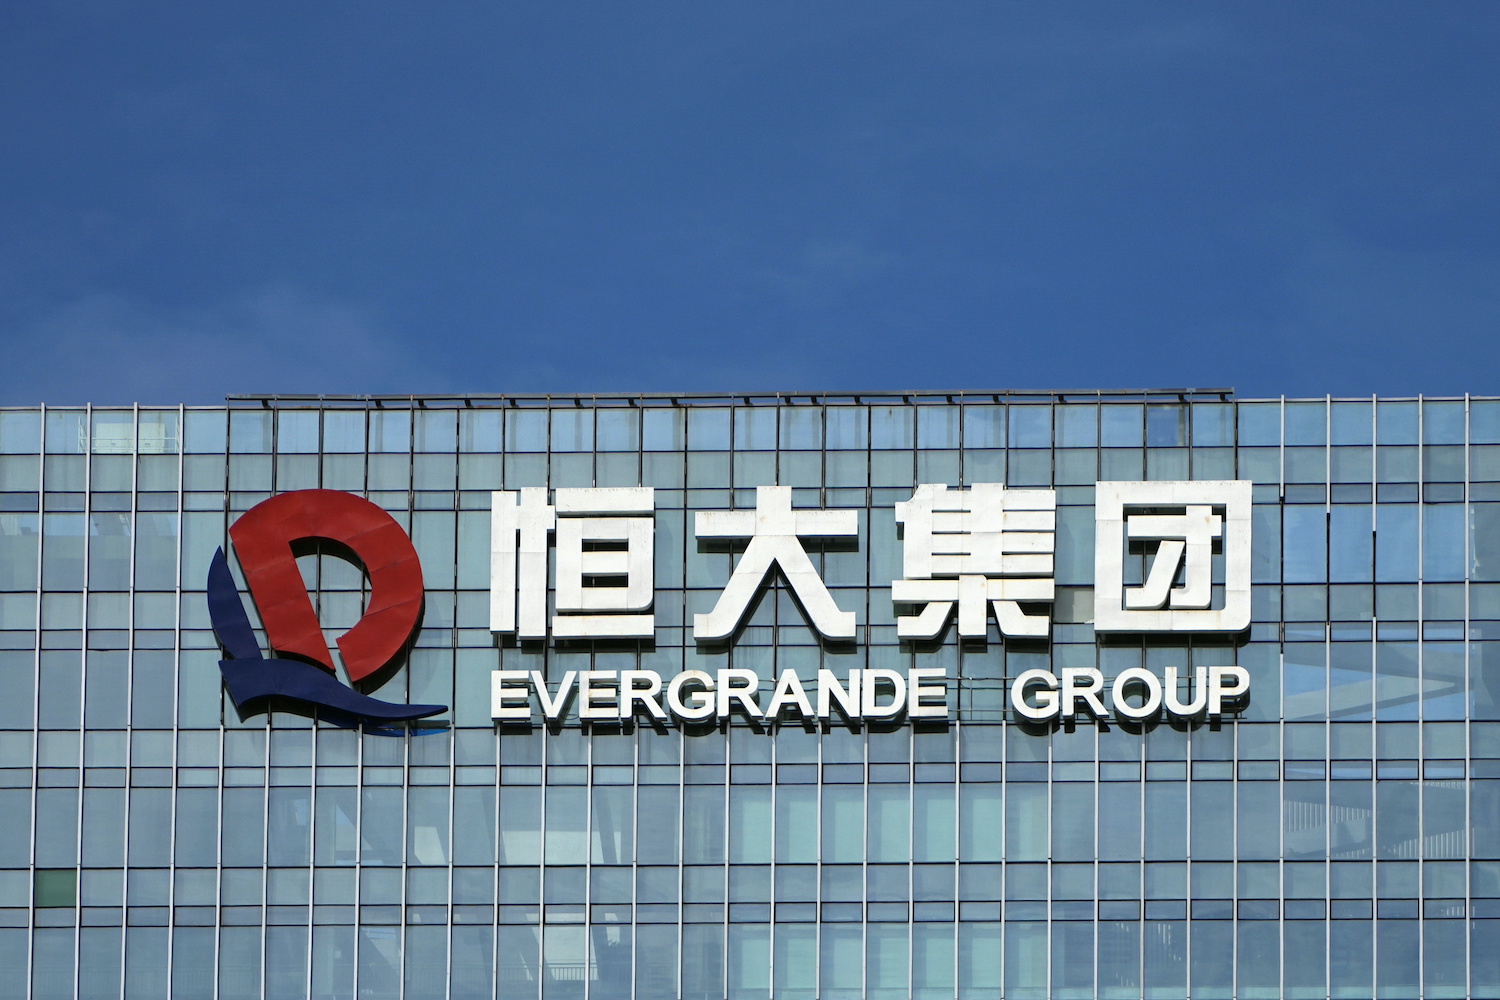 PwC Probed For ‘Enabling Evergrande Misconduct For Years’